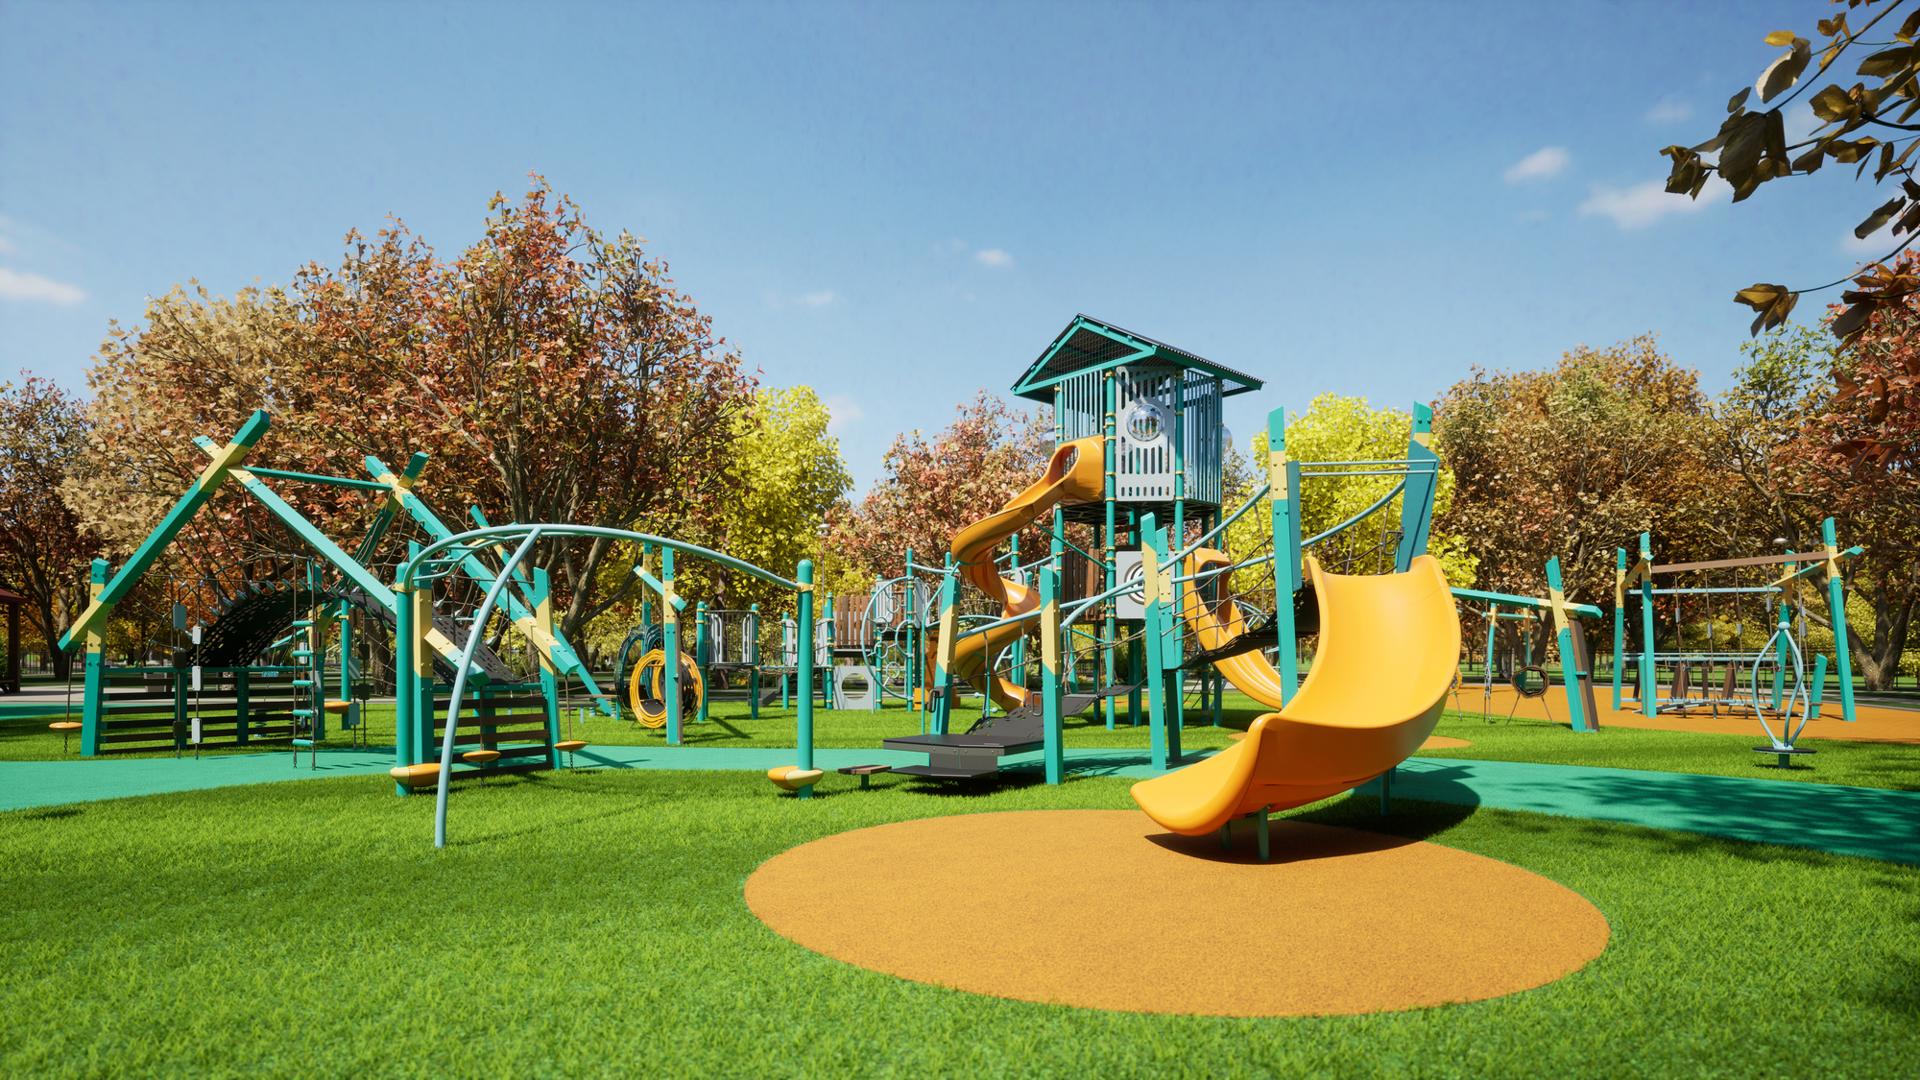 Animated rendering of a park play area with modern design play structures colored in teal with yellow accents. Surrounding trees leaves are yellowing and browning.